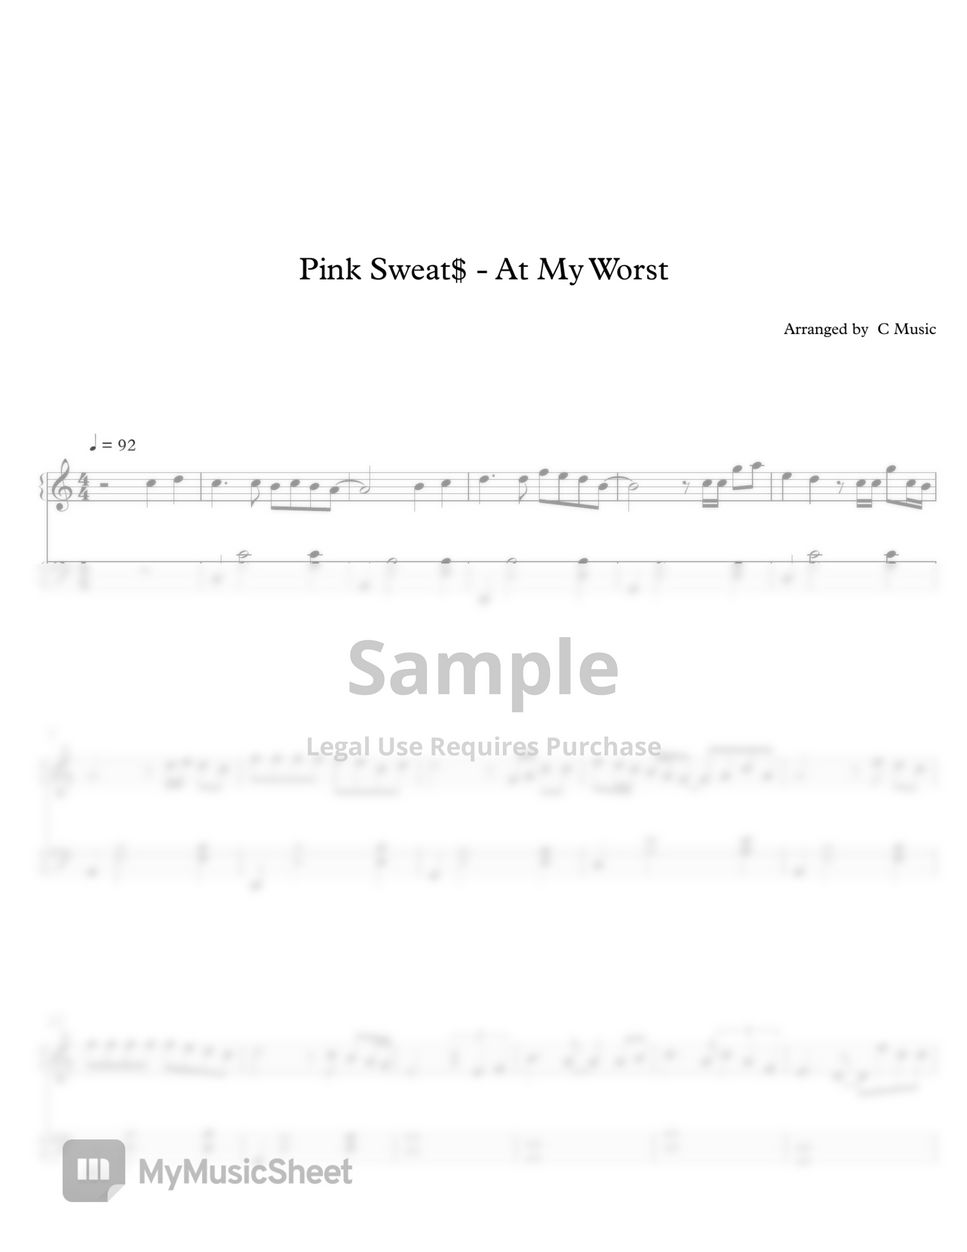 Pink Sweat$ - At My Worst by C Music